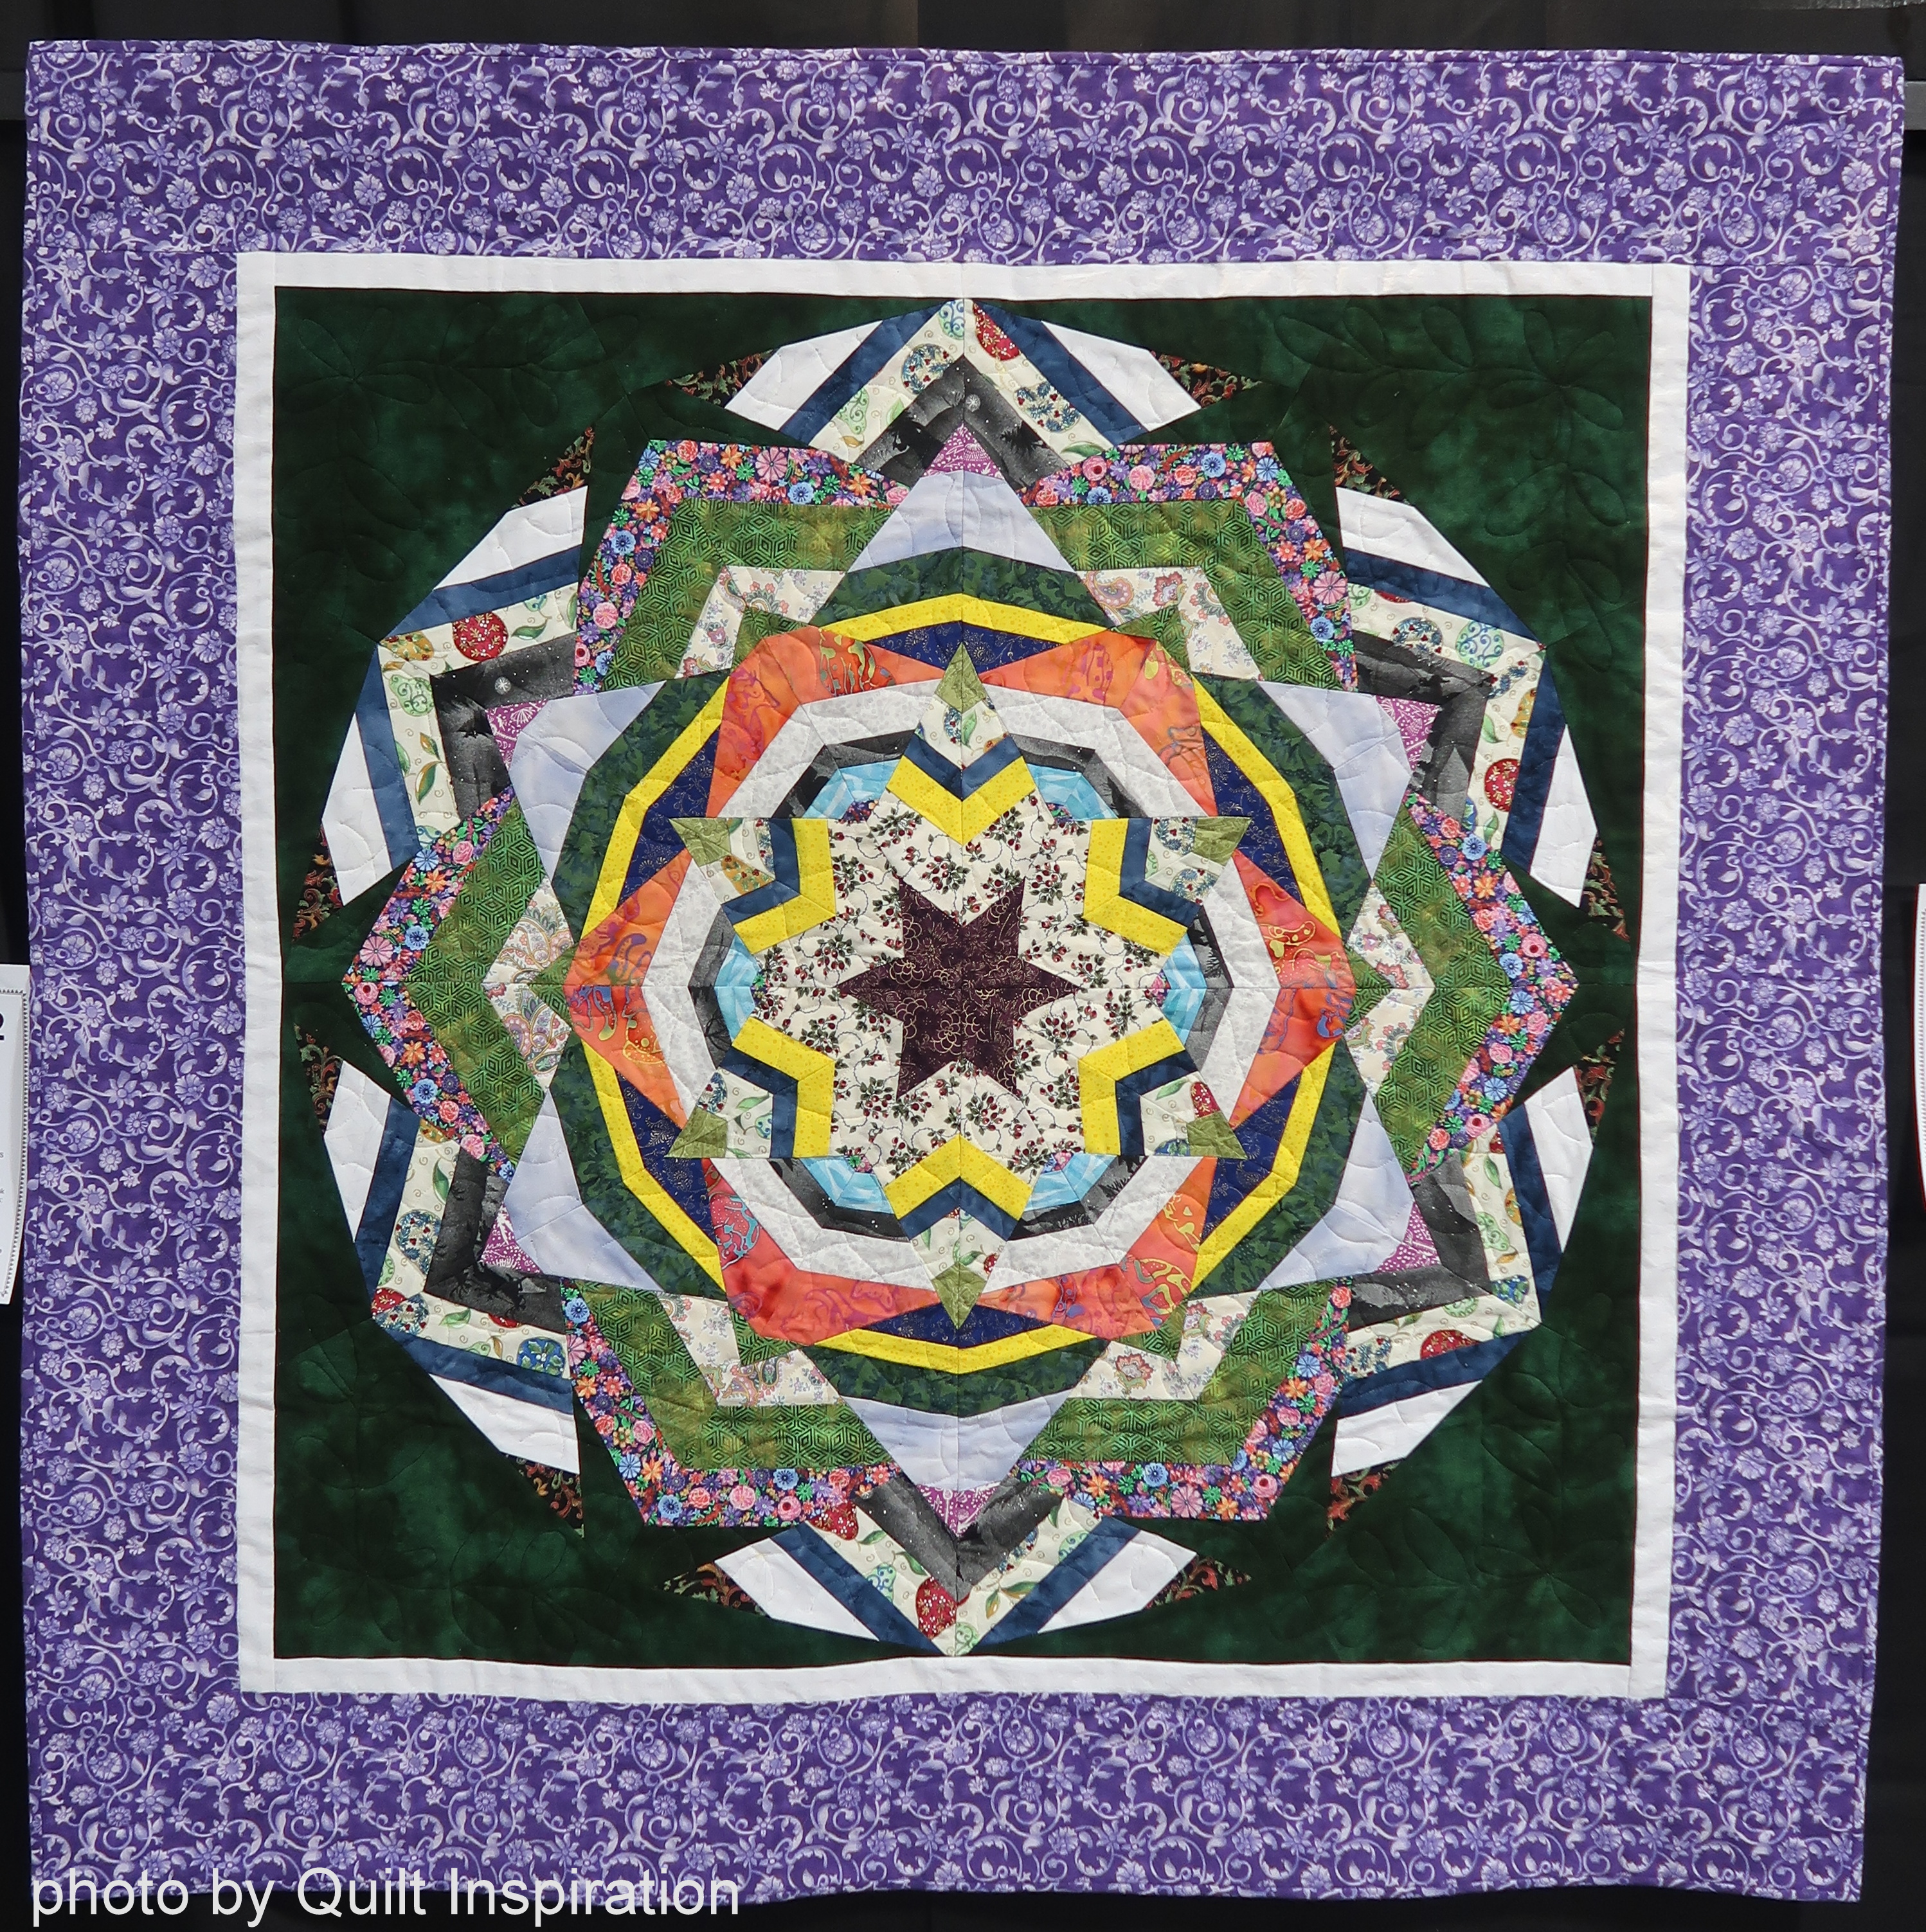 Hot Off The Press! Introducing Kaffe Fassett's SEW Simple Quilts and  Patchwork Book!